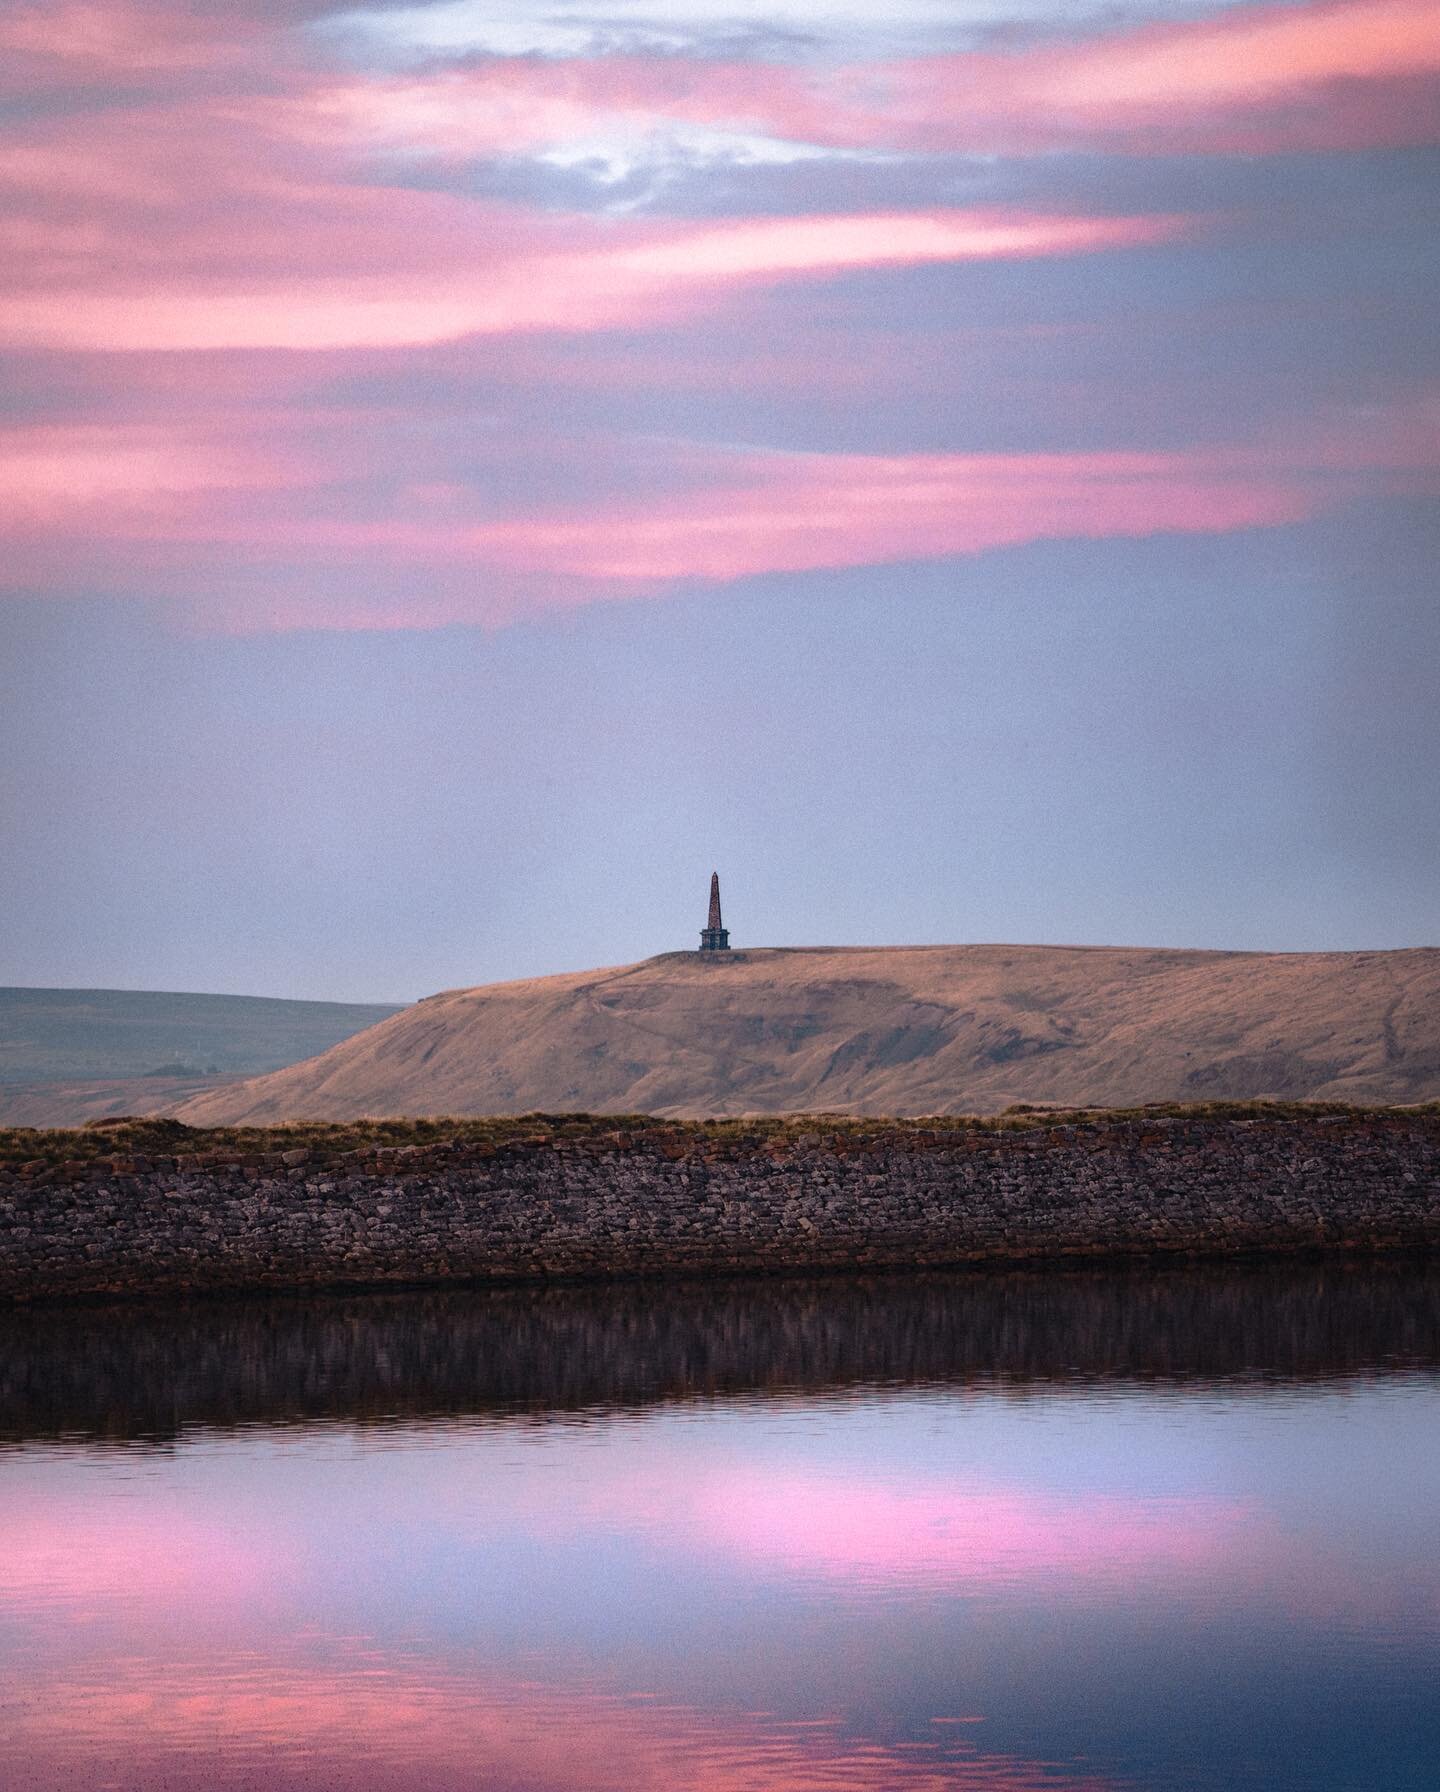 The first time it was struck by lightning it crumbled to the ground...

Calderdale&rsquo;s Stoodley Pike dominates the skyline of the surrounding valleys  and was built to commemorate the defeat of Napoleon in 1814.

This original pike was actually d